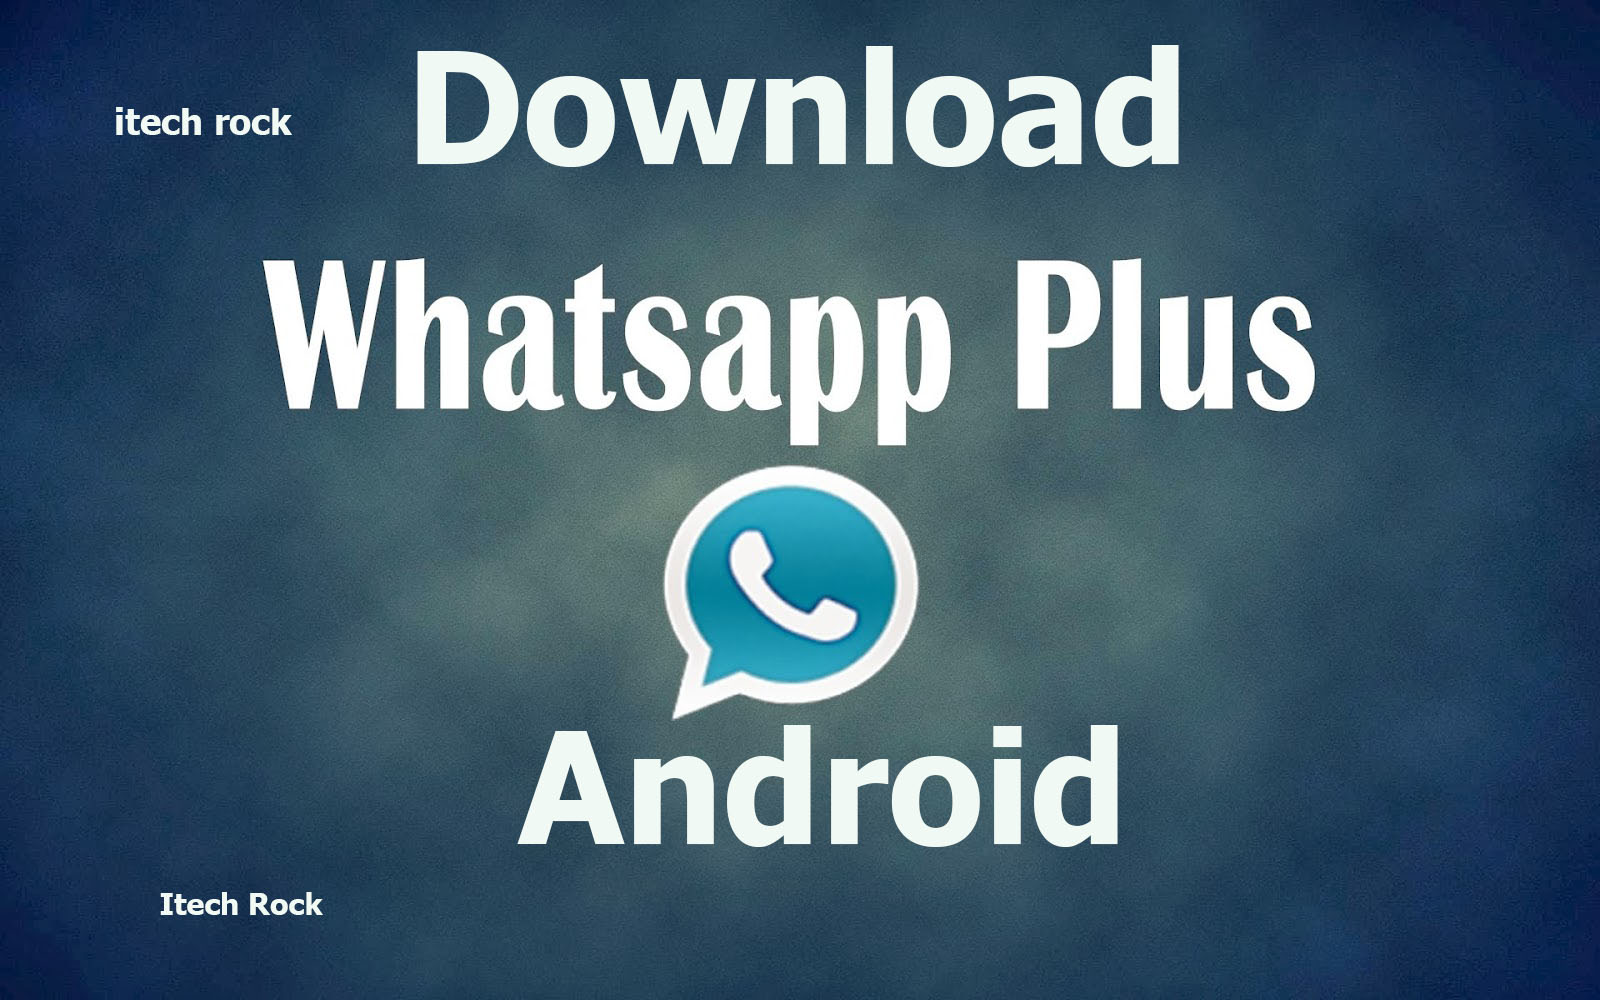 Download WhatsApp Plus Apk Latest version for Android